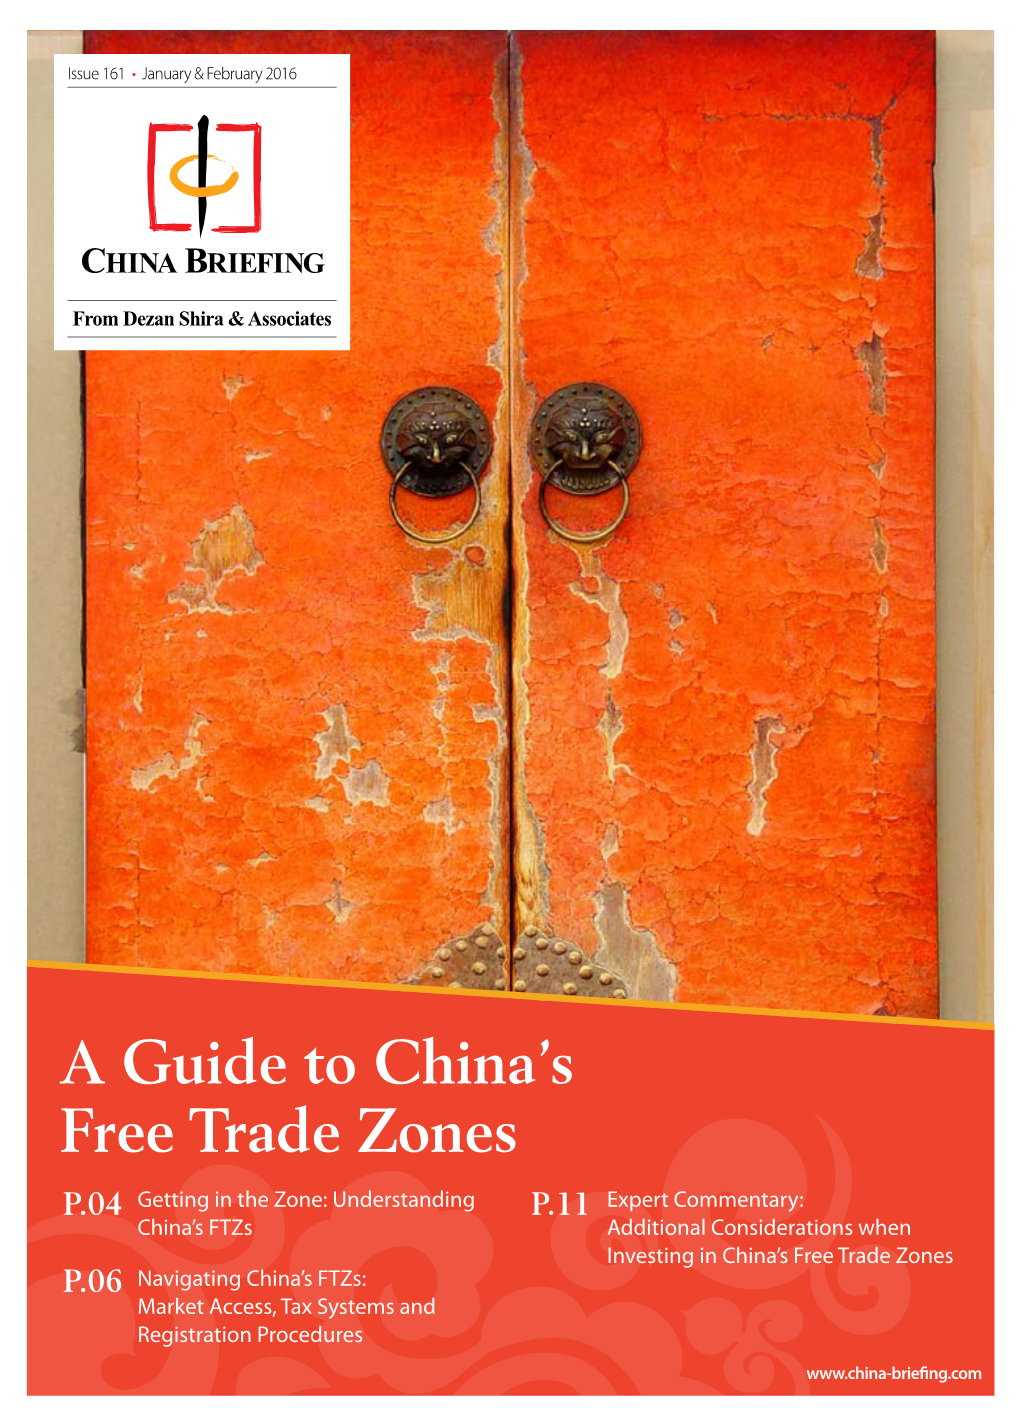 A Guide to China's Free Trade Zones